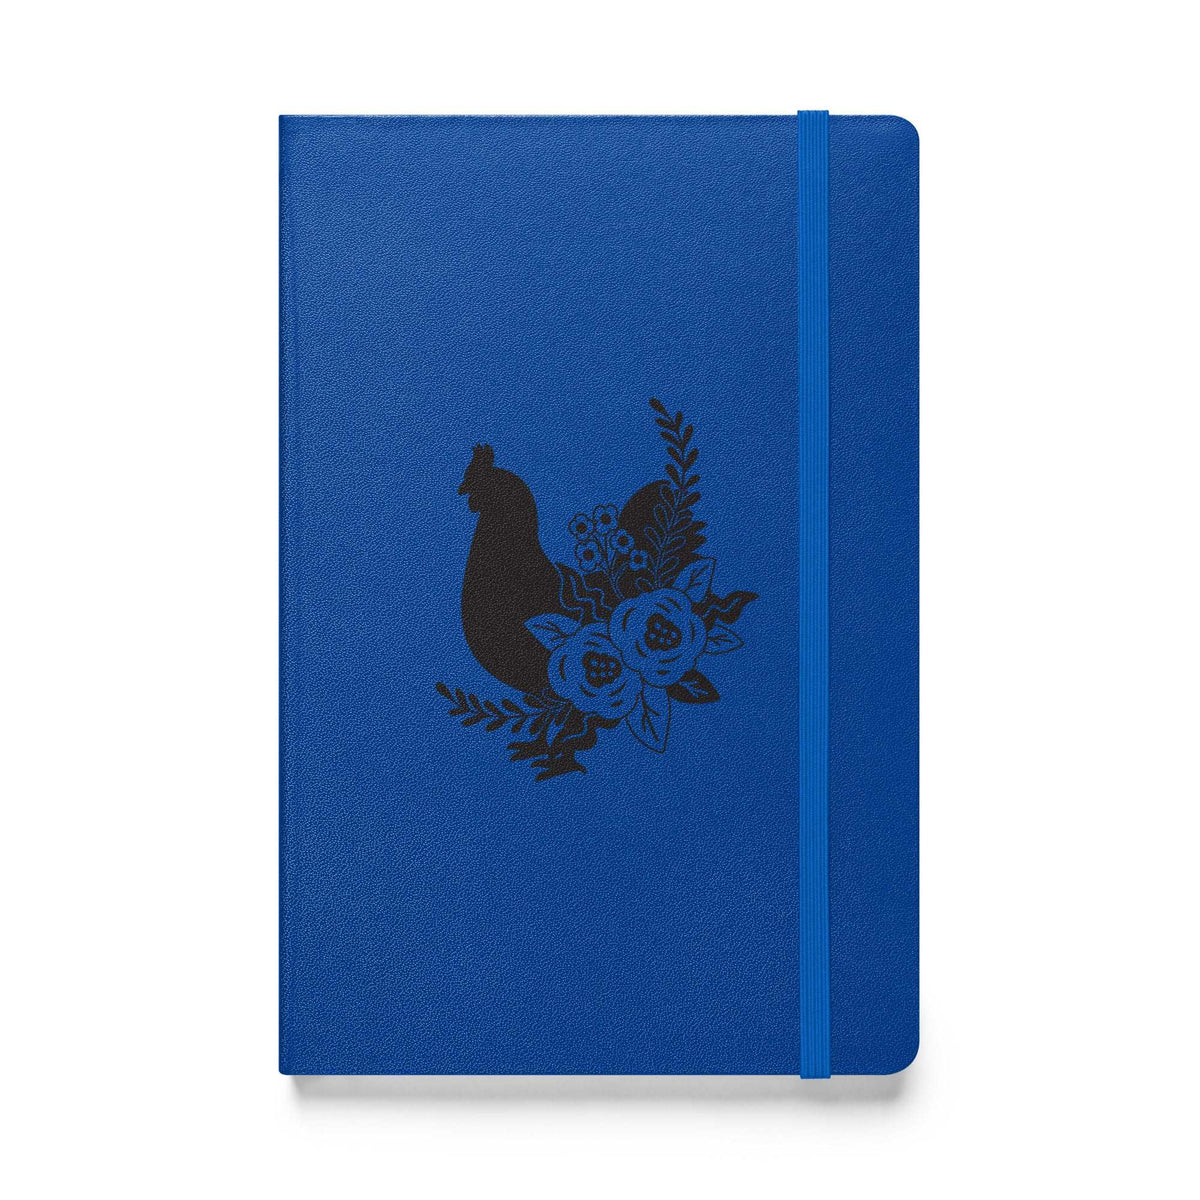 Floral Chicken Hardcover Bound Notebook - Cluck It All Farms